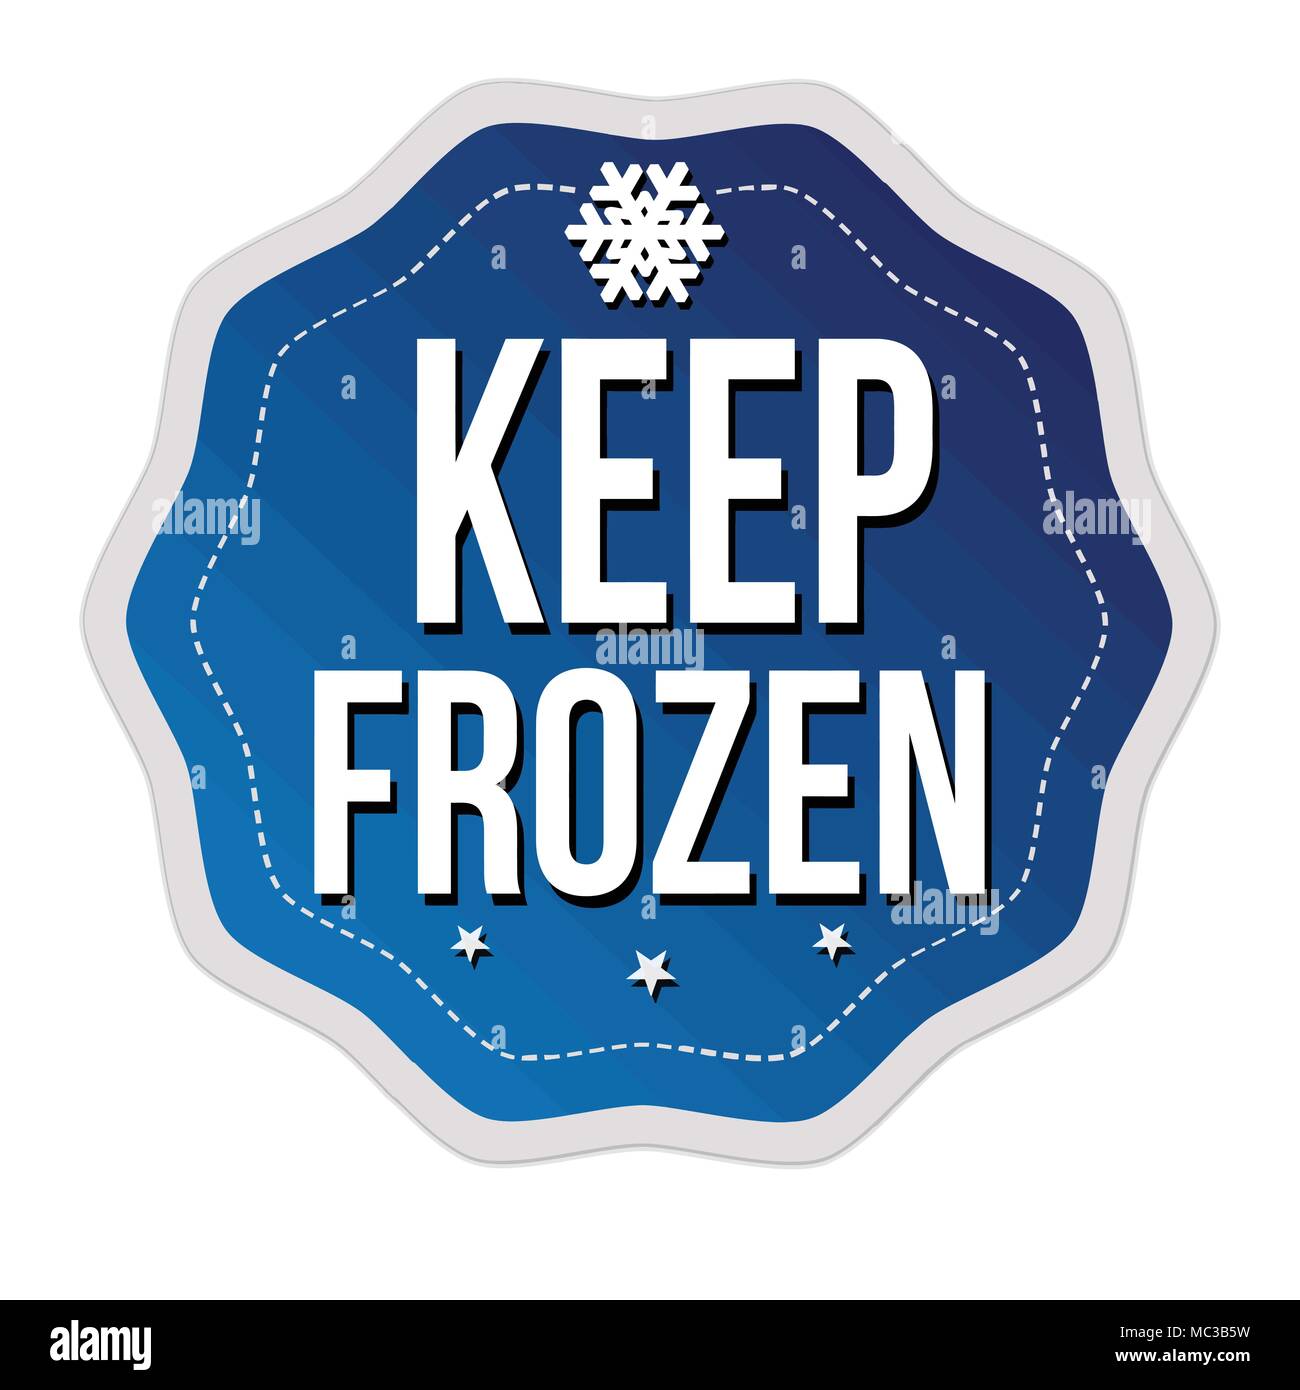 Keep frozen label or sticker on white background, vector illustration Stock Vector